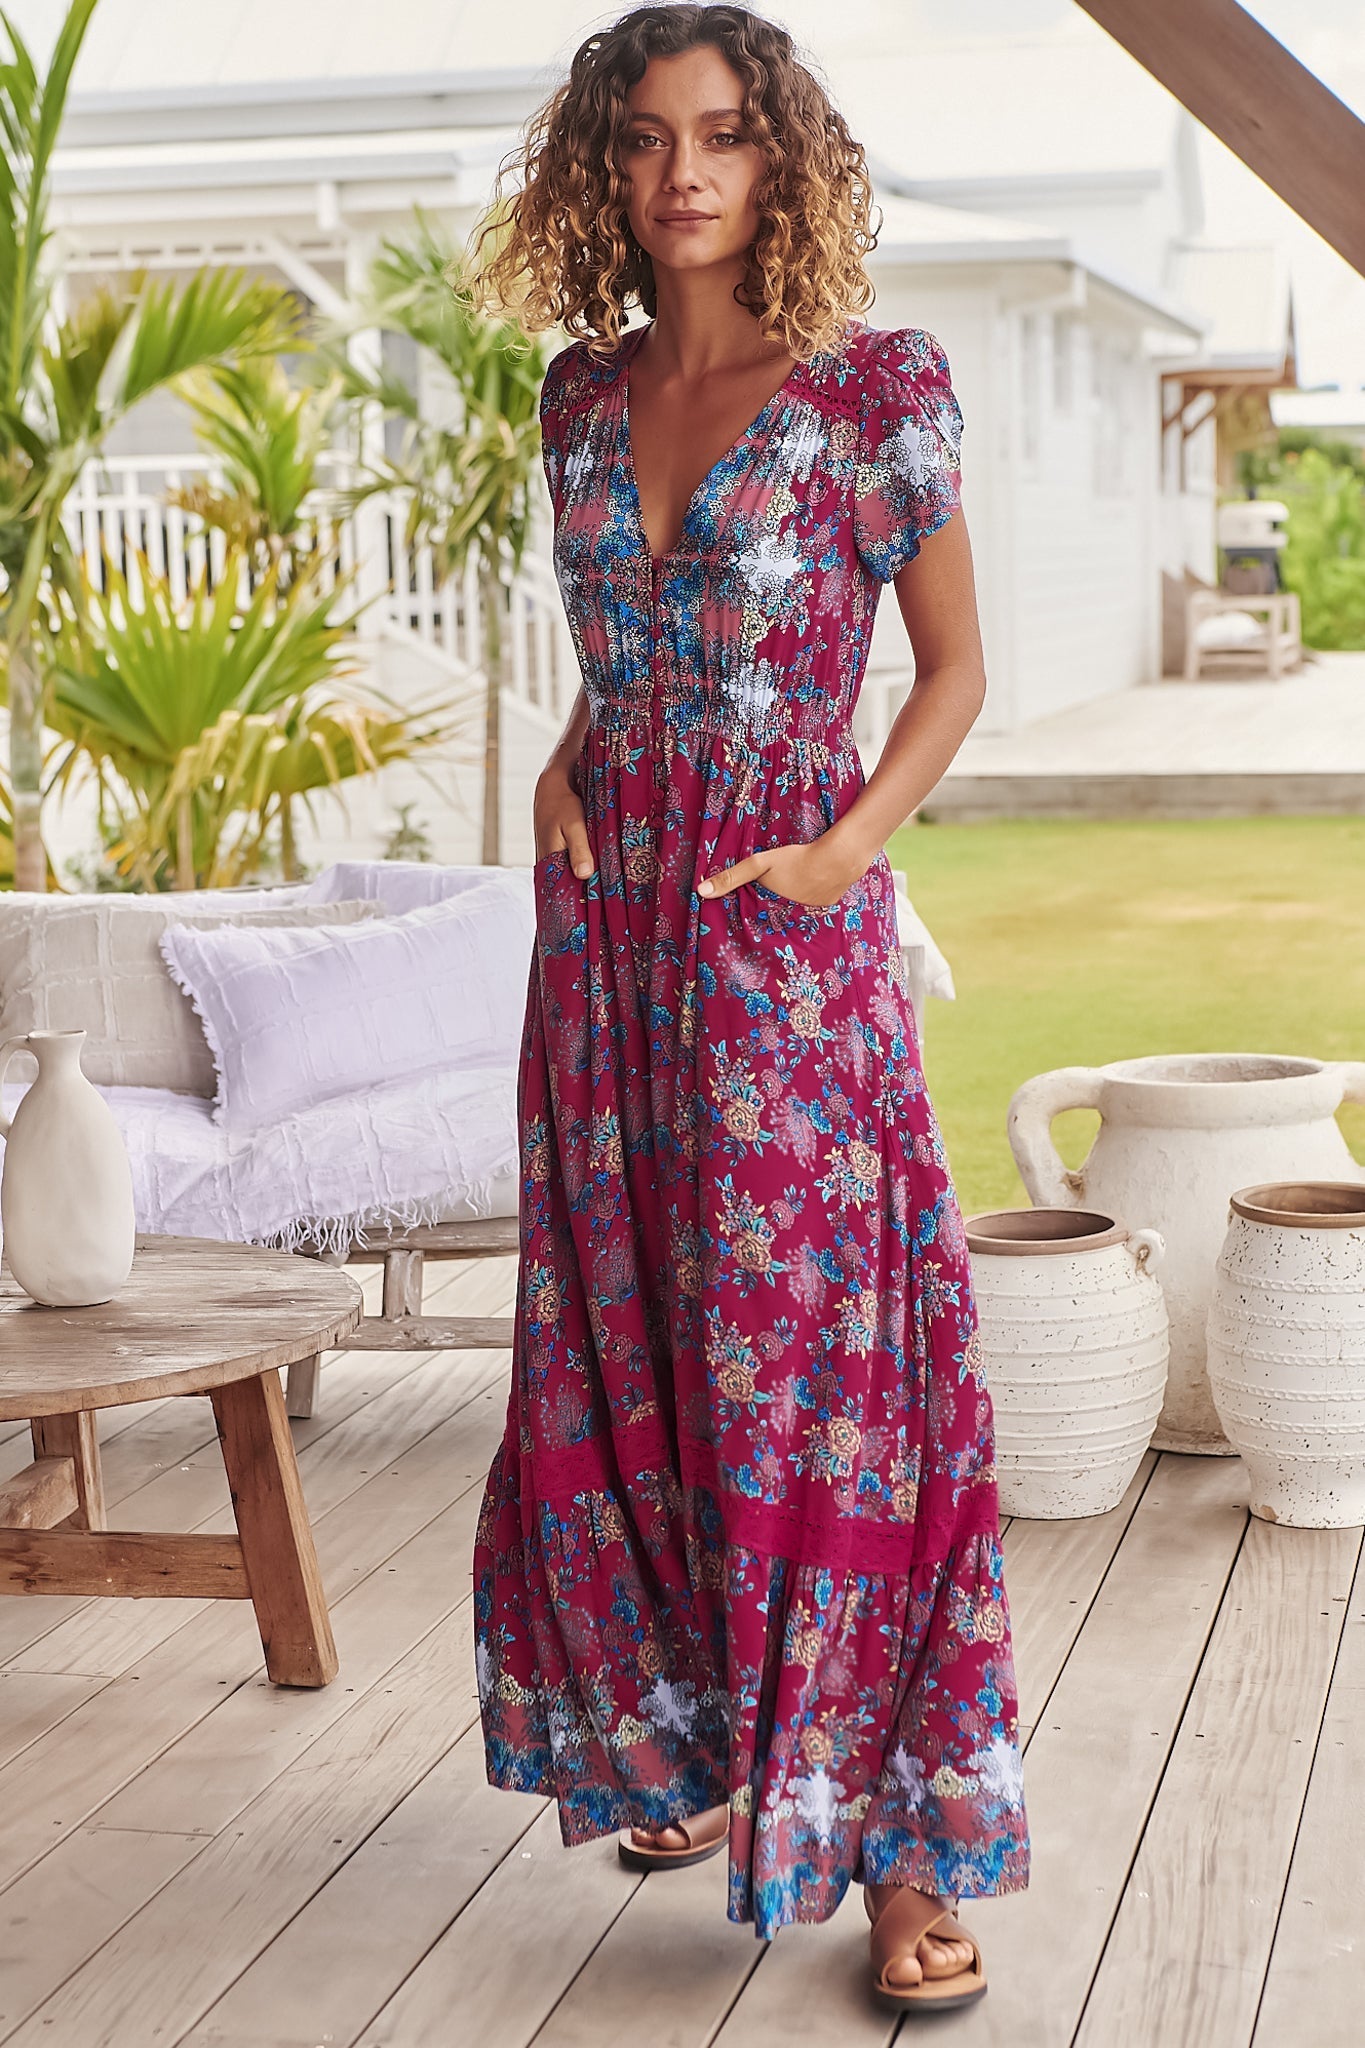 JAASE - Carmen Maxi Dress: Butterfly Cap Sleeve Button Down A Line Dress with Lace Trim in Strawberry Kiss Print